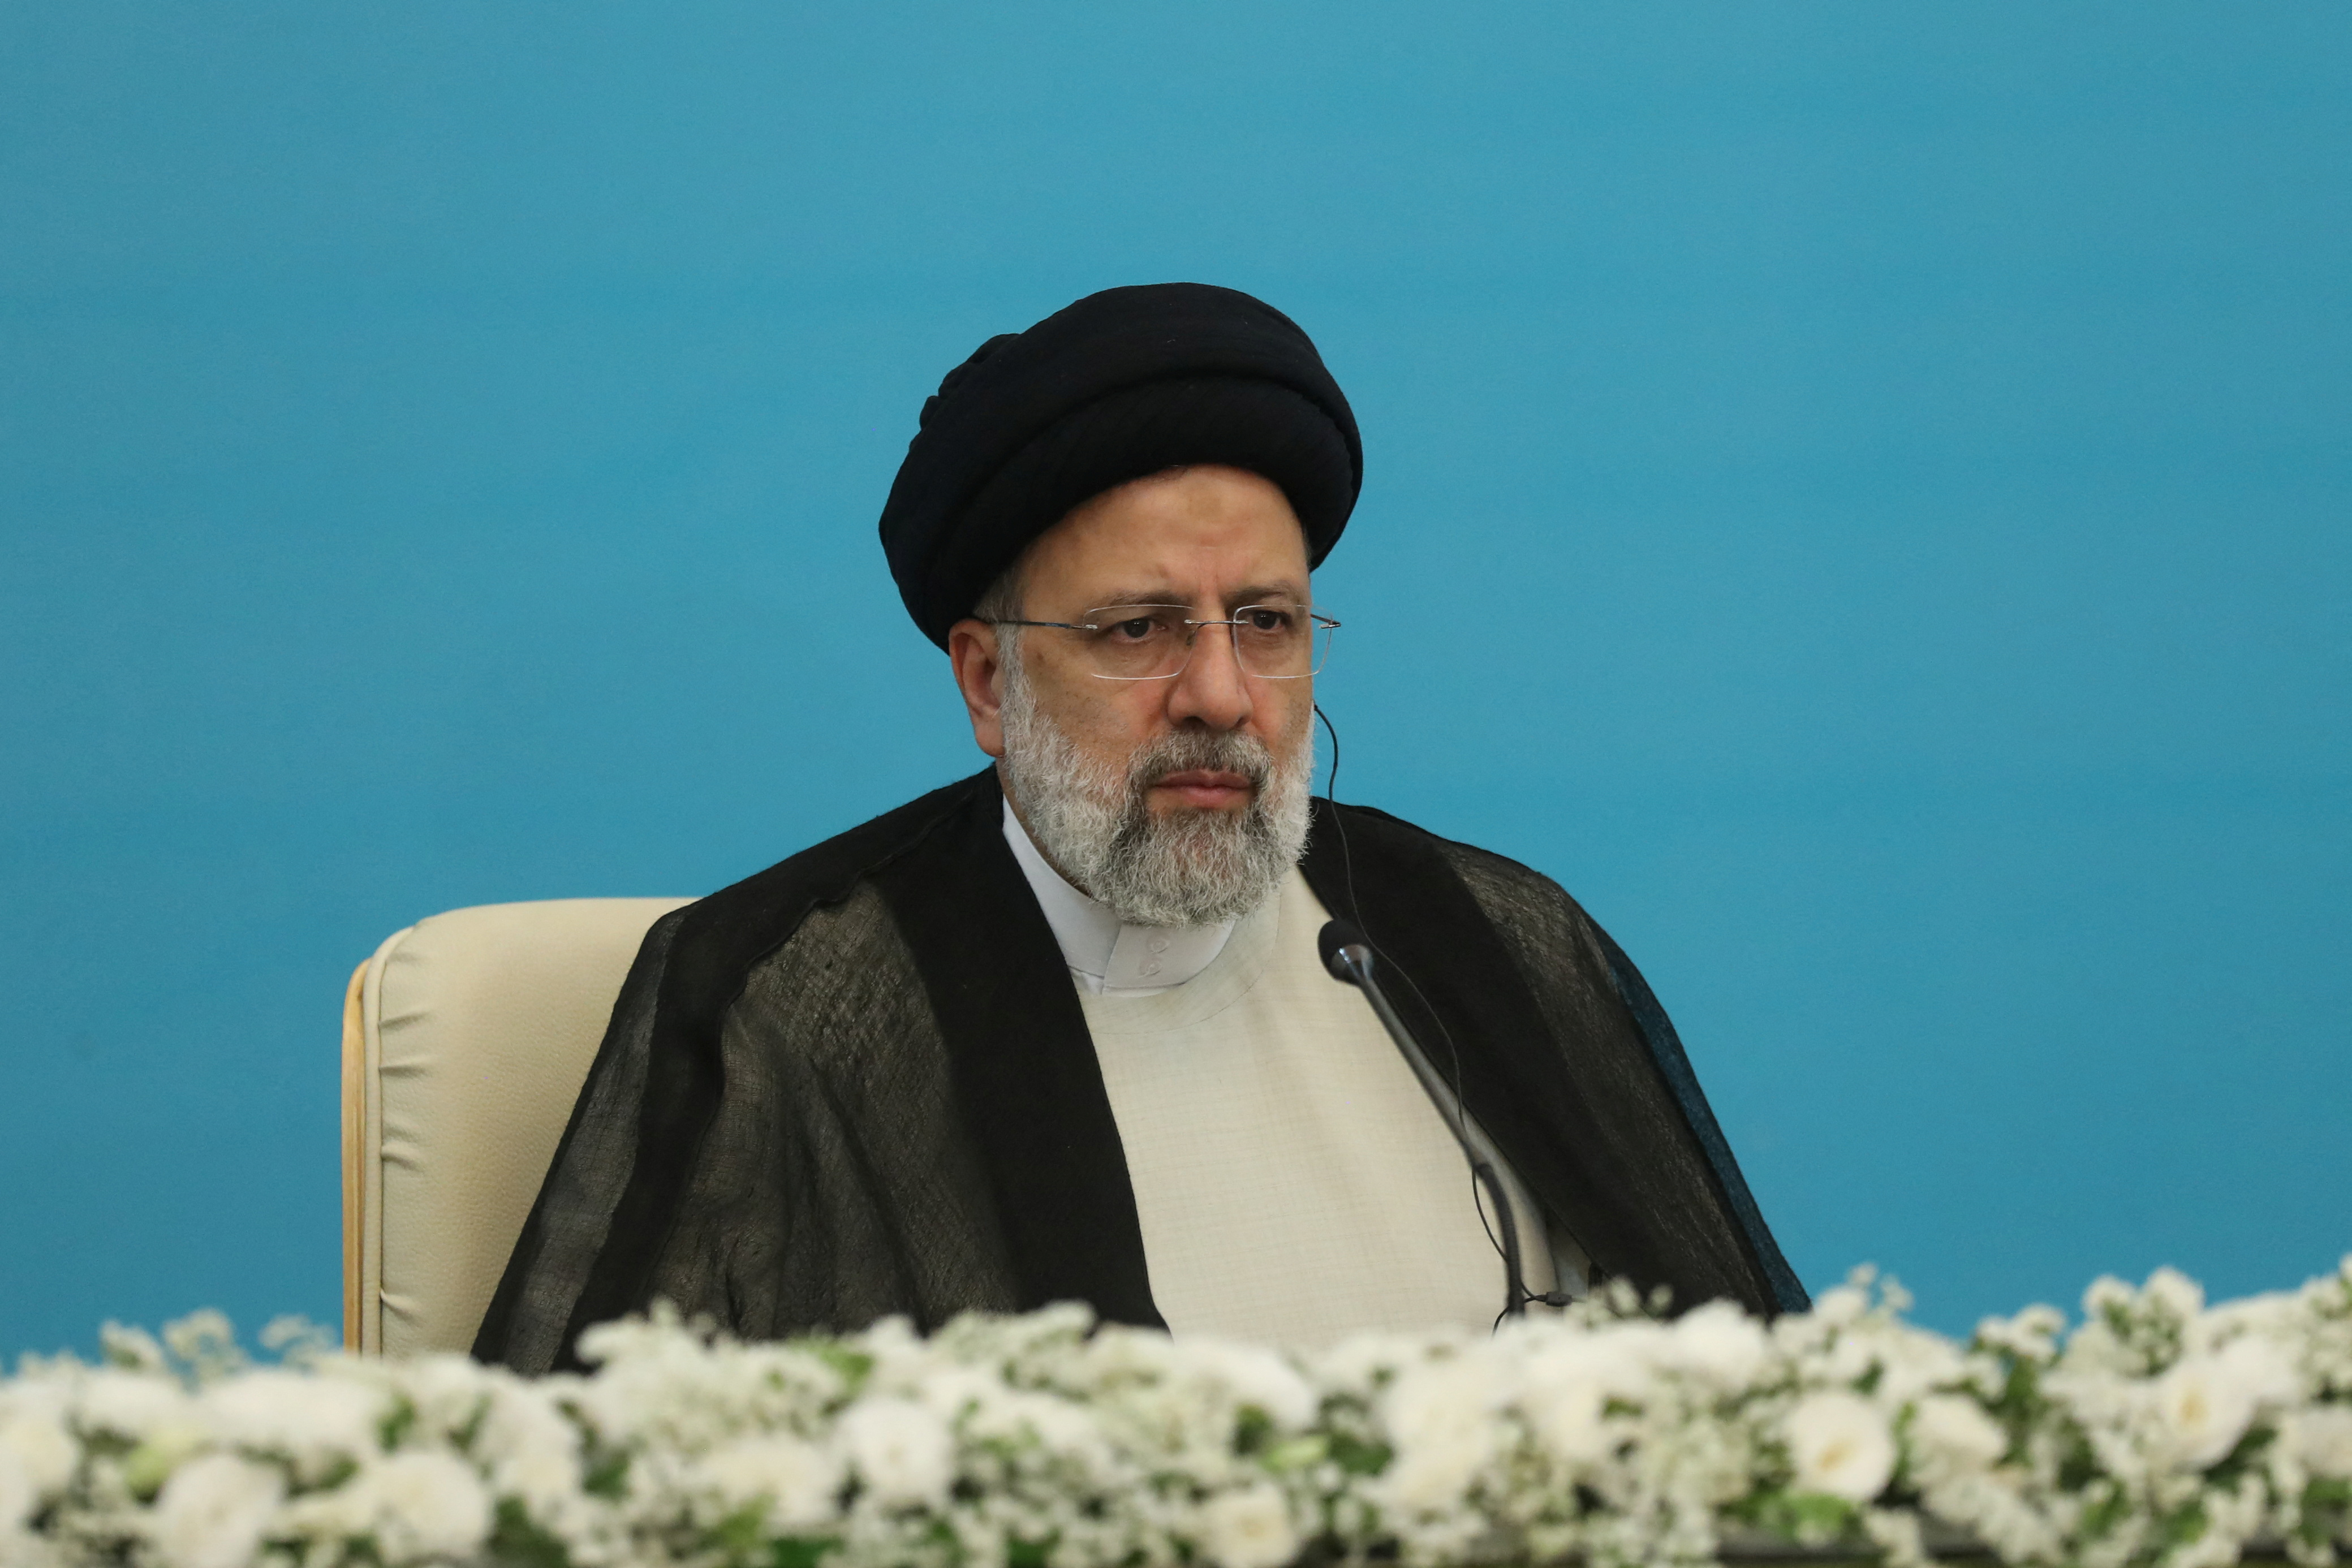 Iranian President Ebrahim Raisi attends a news conference following the Astana Process summit in Tehran, Iran July 19, 2022. Majid Asgaripour/WANA (West Asia News Agency)/Handout via REUTERS ATTENTION EDITORS - THIS IMAGE HAS BEEN SUPPLIED BY A THIRD PARTY.